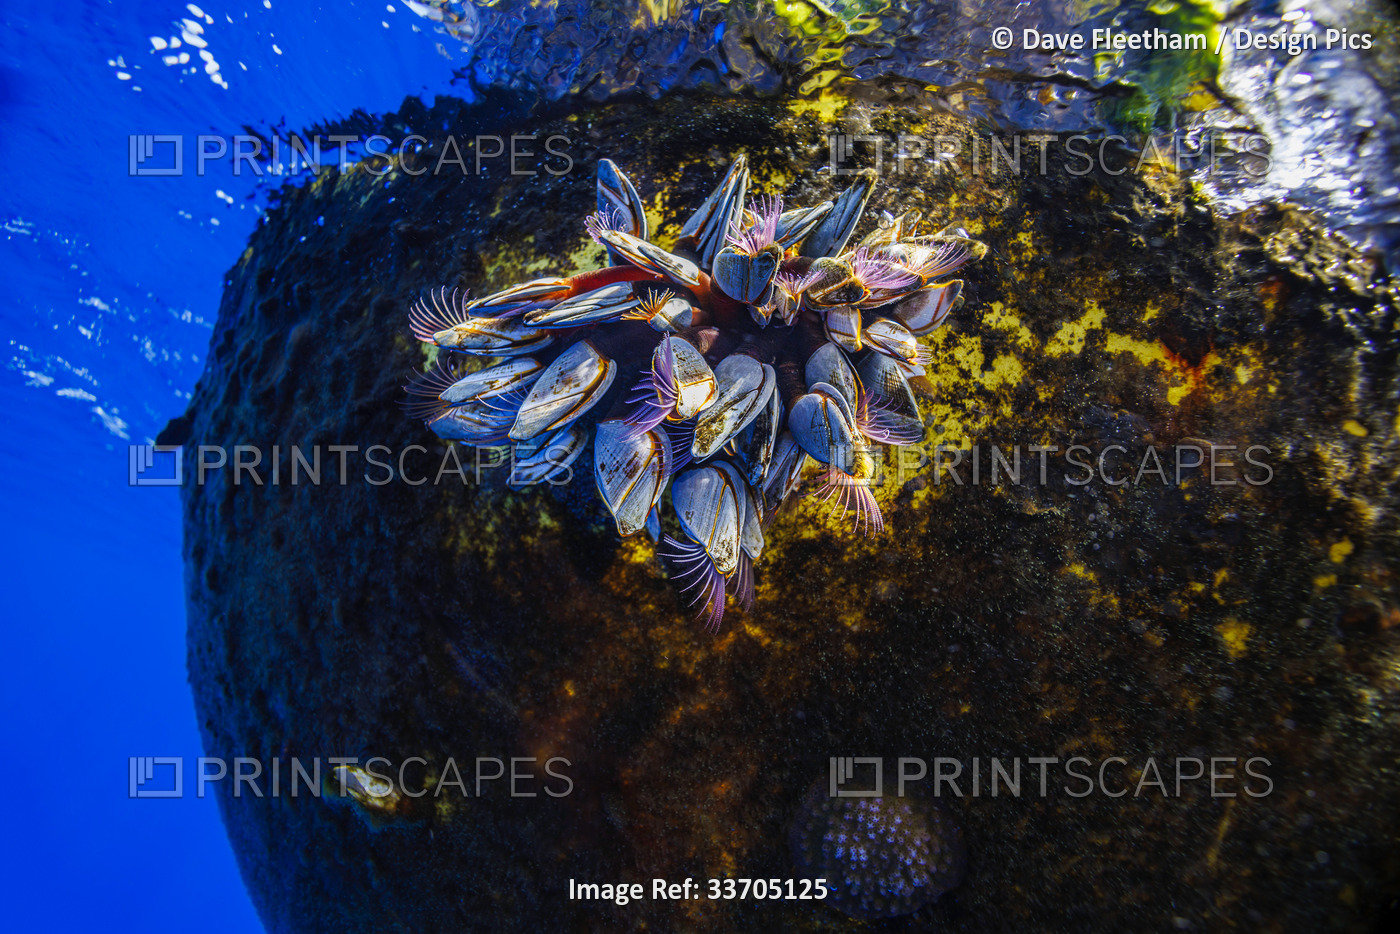 This group of Gooseneck barnacles (Lepas anatifera) are attached to a buoy ...